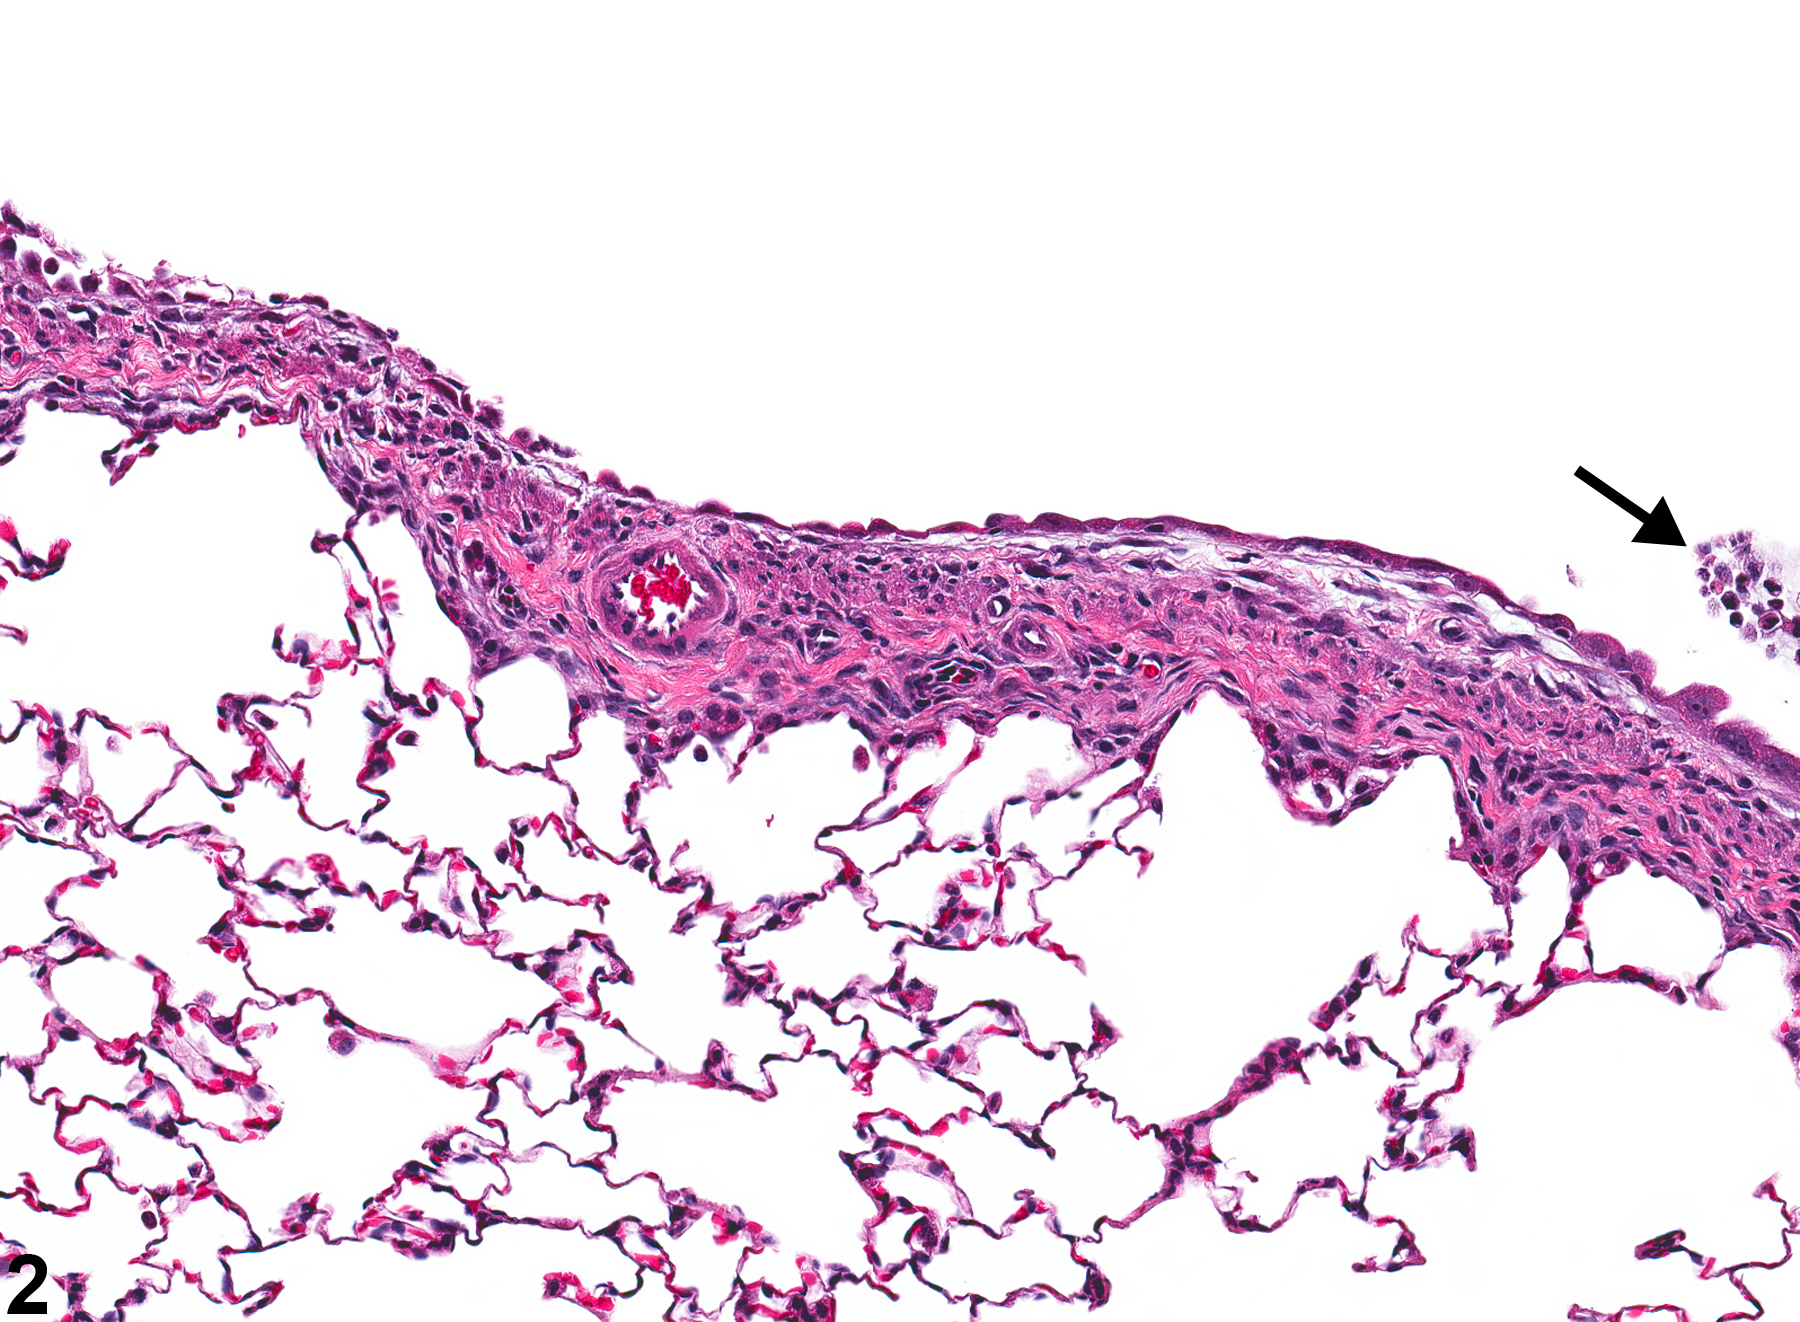 Image of bronchiolar regeneration in the lung from a male Wistar Han rat in a acute study